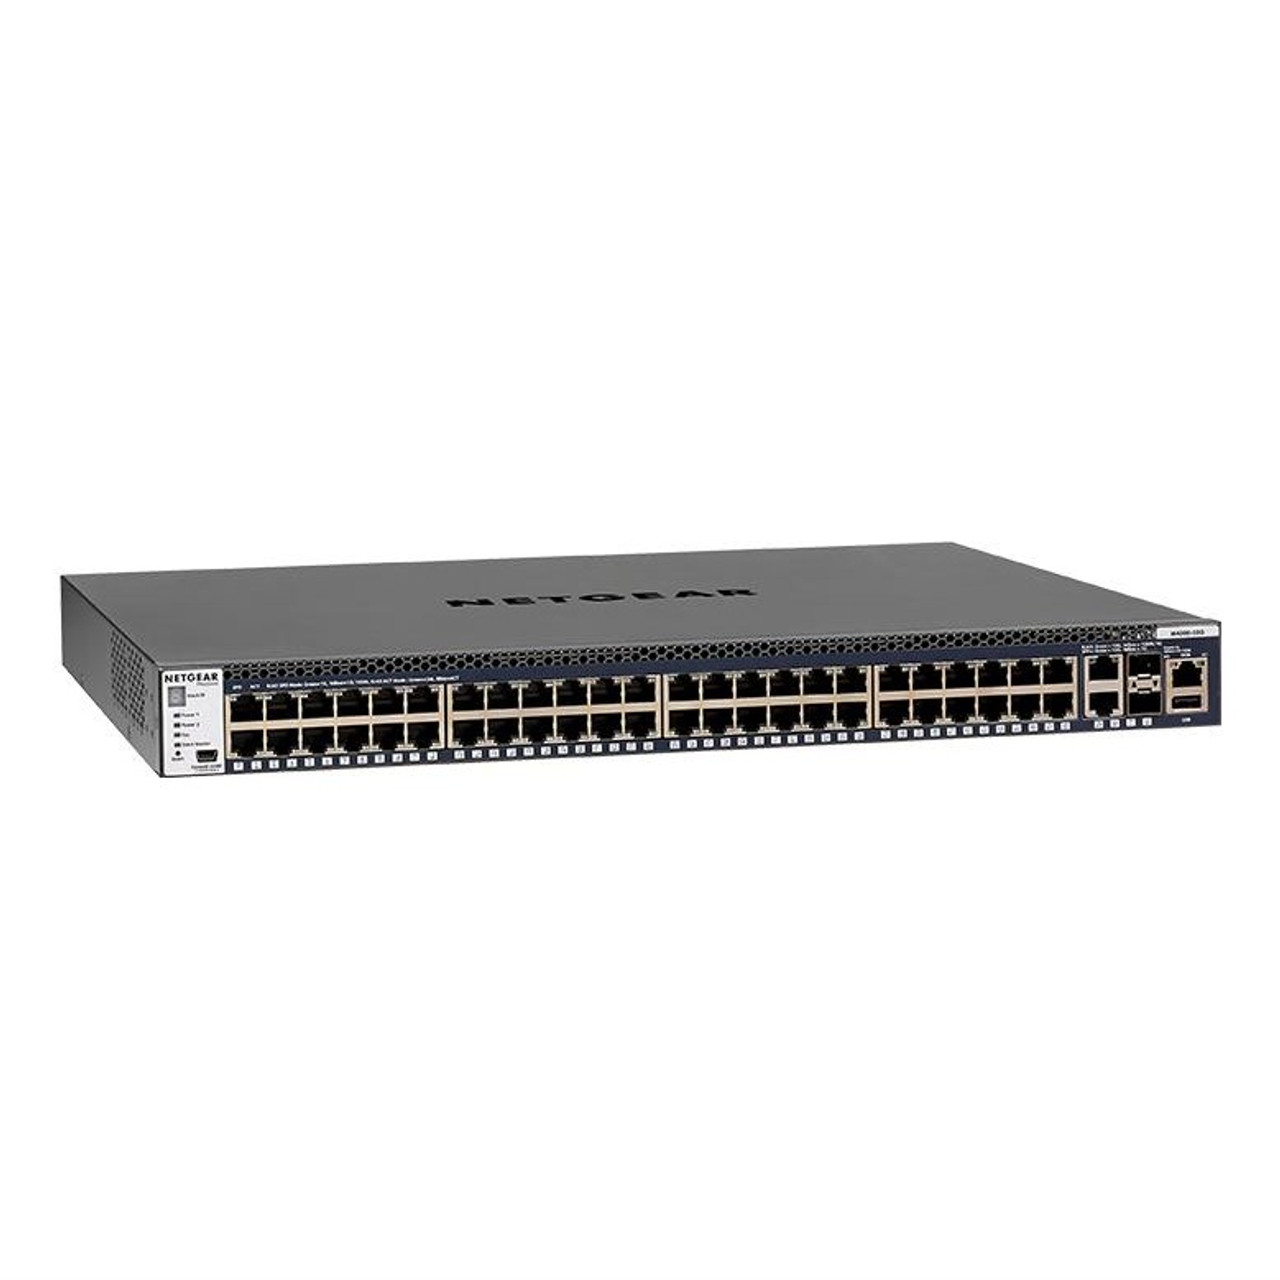 Netgear M4300-52G 48-Port Gigabit Layer 3 Stackable Managed Switch with 2x 10G & 2x SFP